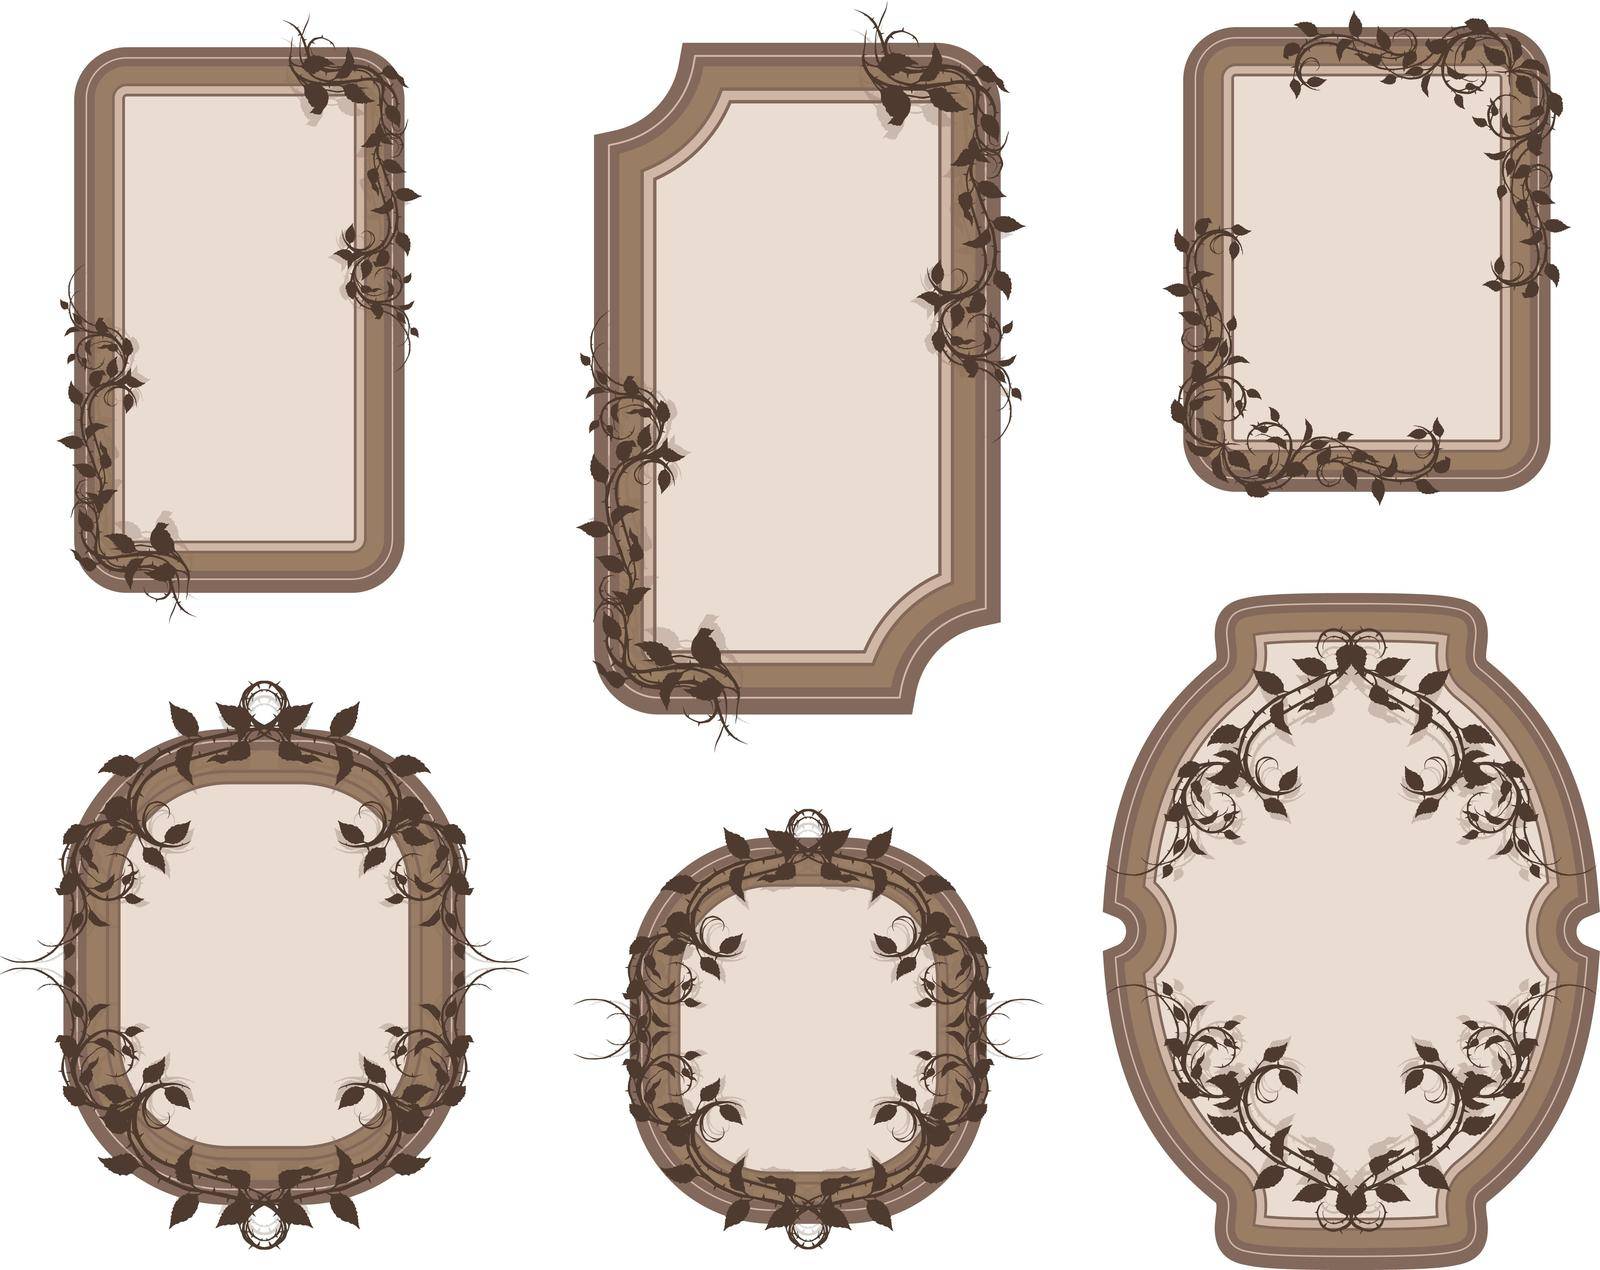 Decorative graphic vintage elegant ornate frames with roses, leaves and thorns. Isolated on white background. Vector icon set. Vol. 2